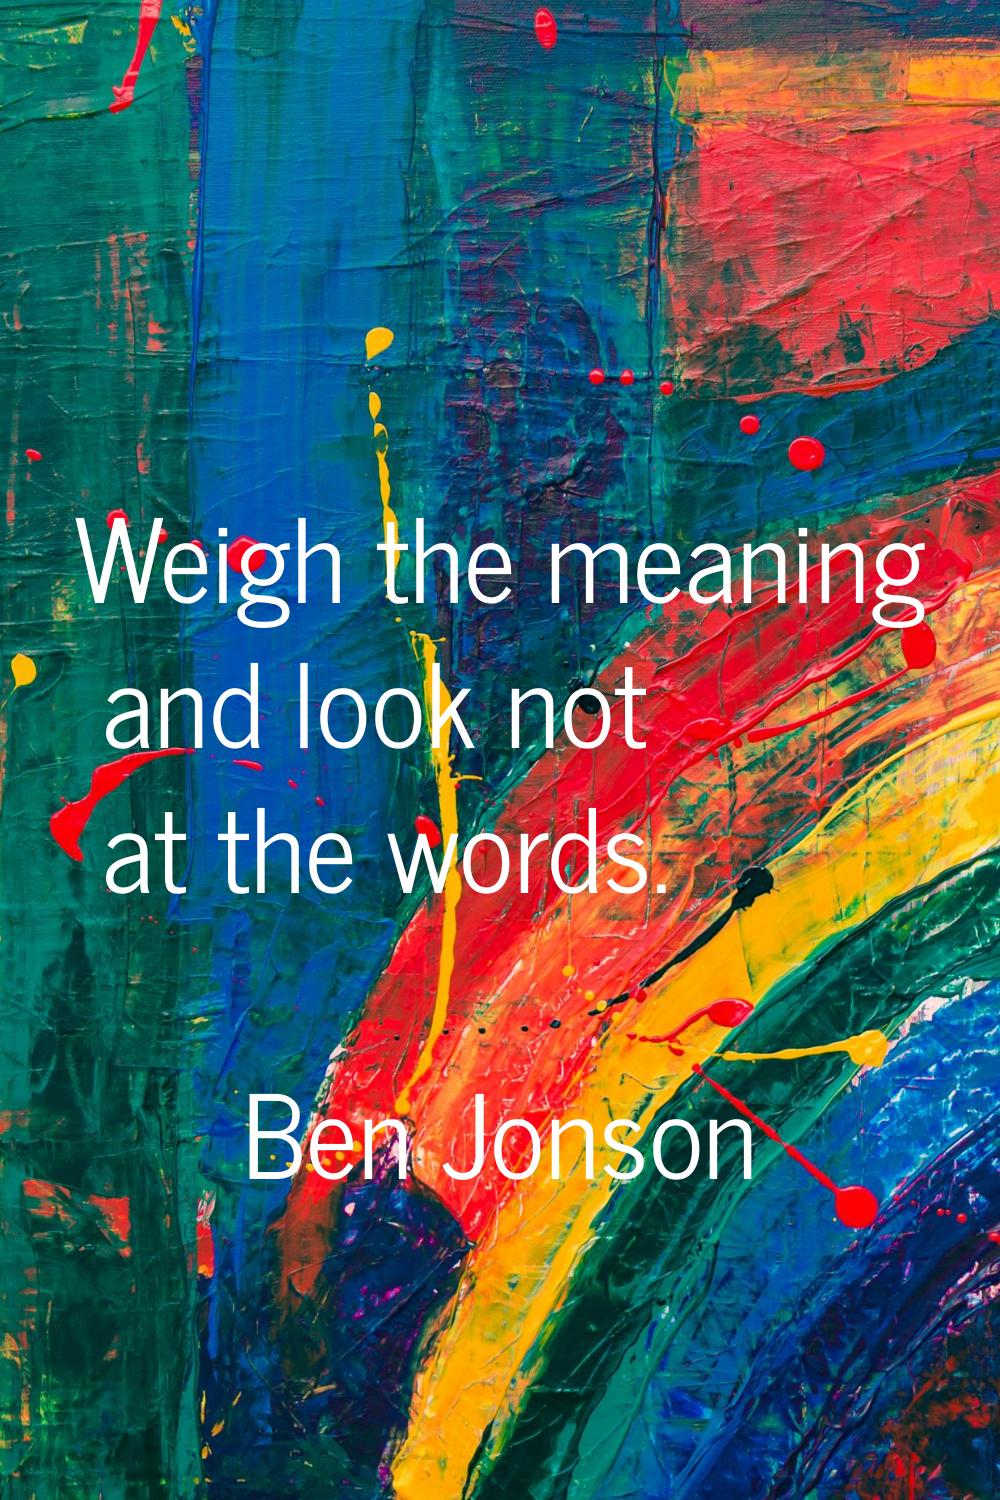 Weigh the meaning and look not at the words.